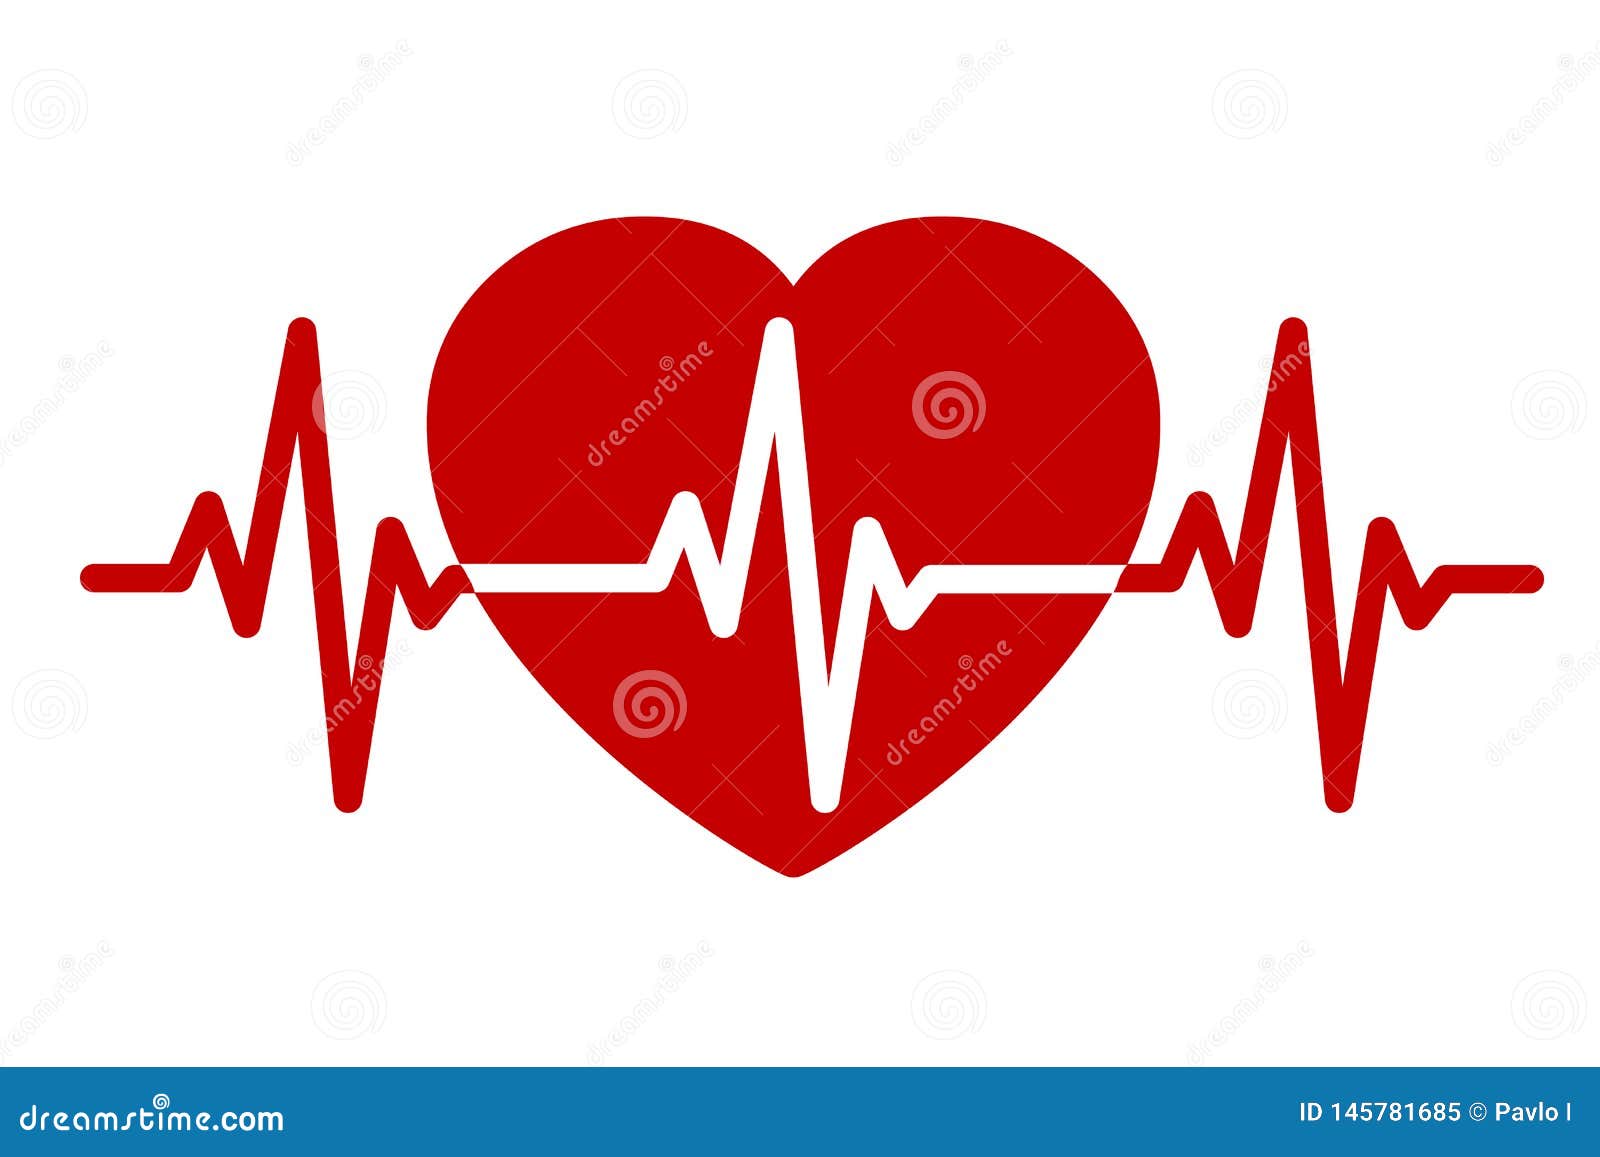 red heart, pulse one line, cardiogram sign, heartbeat - 